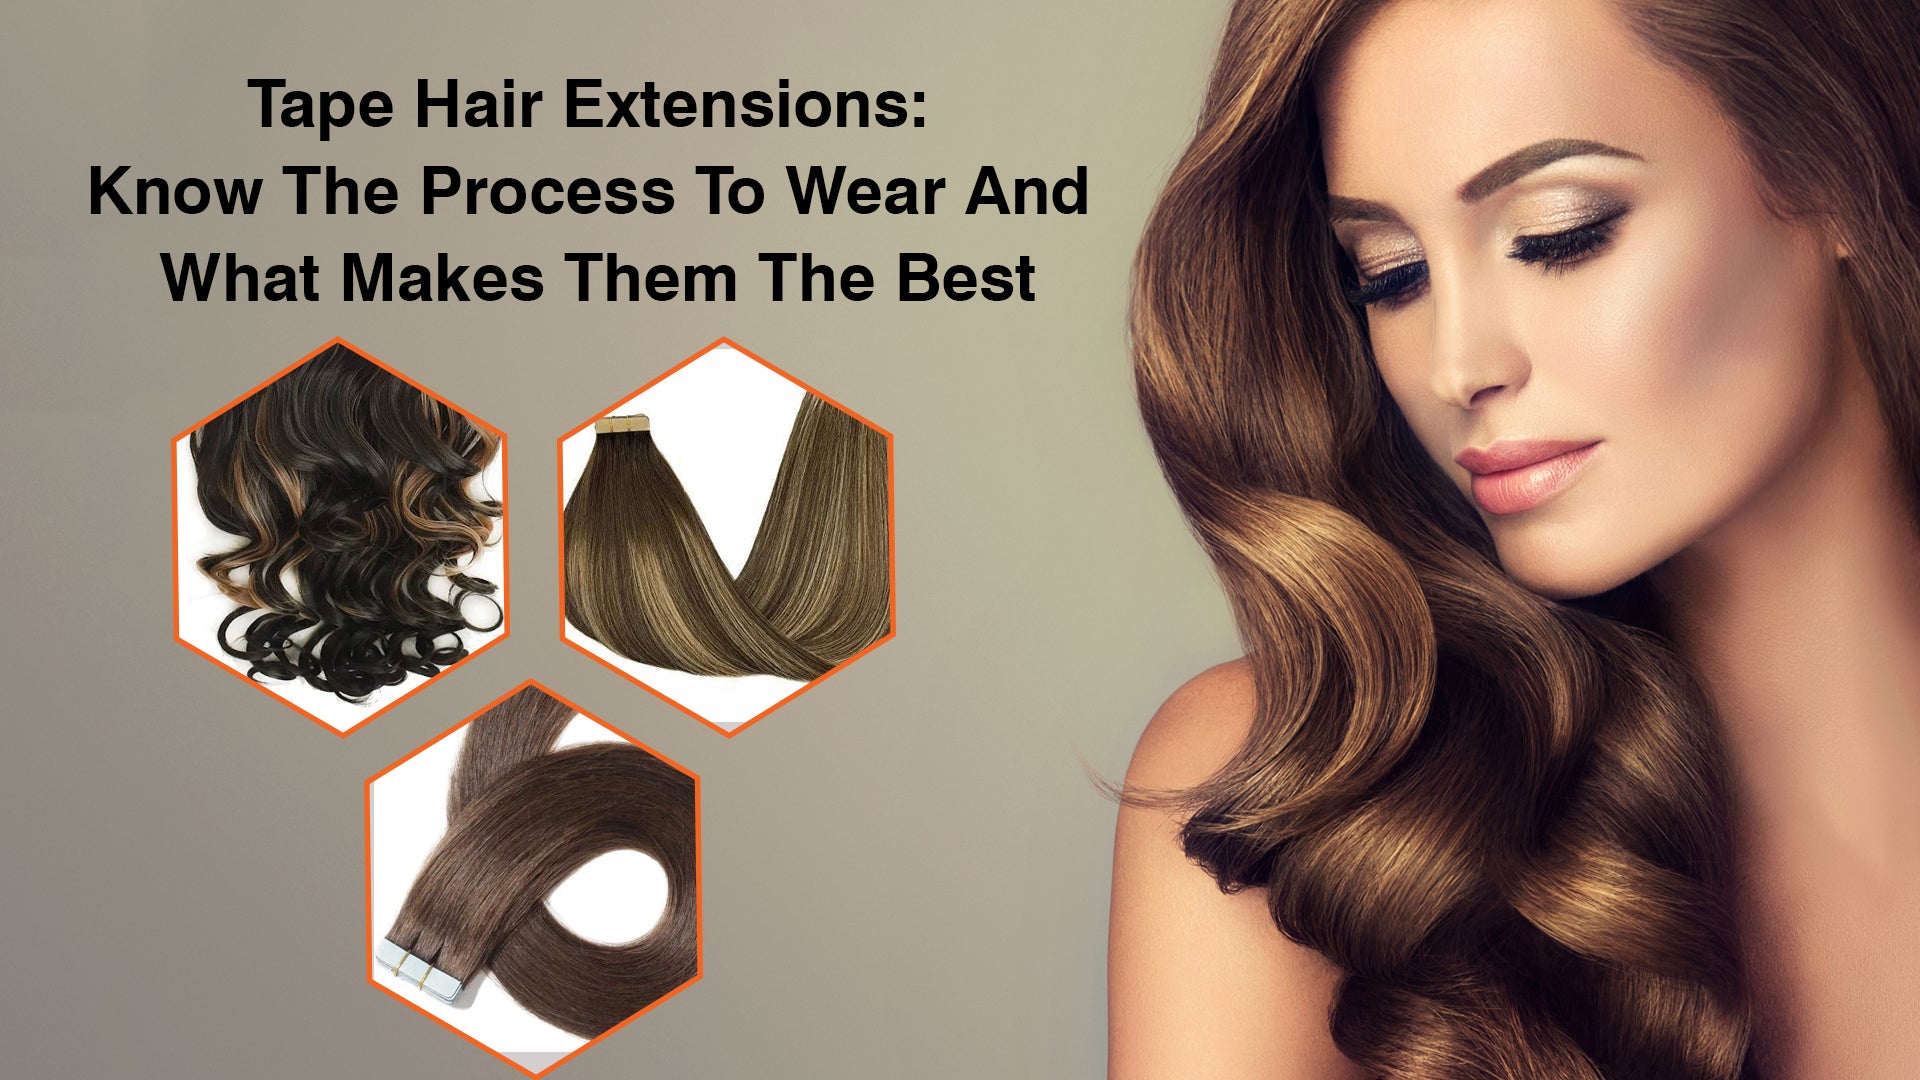 Tape Hair Extensions: Know The Process To Wear And What Makes Them The Best